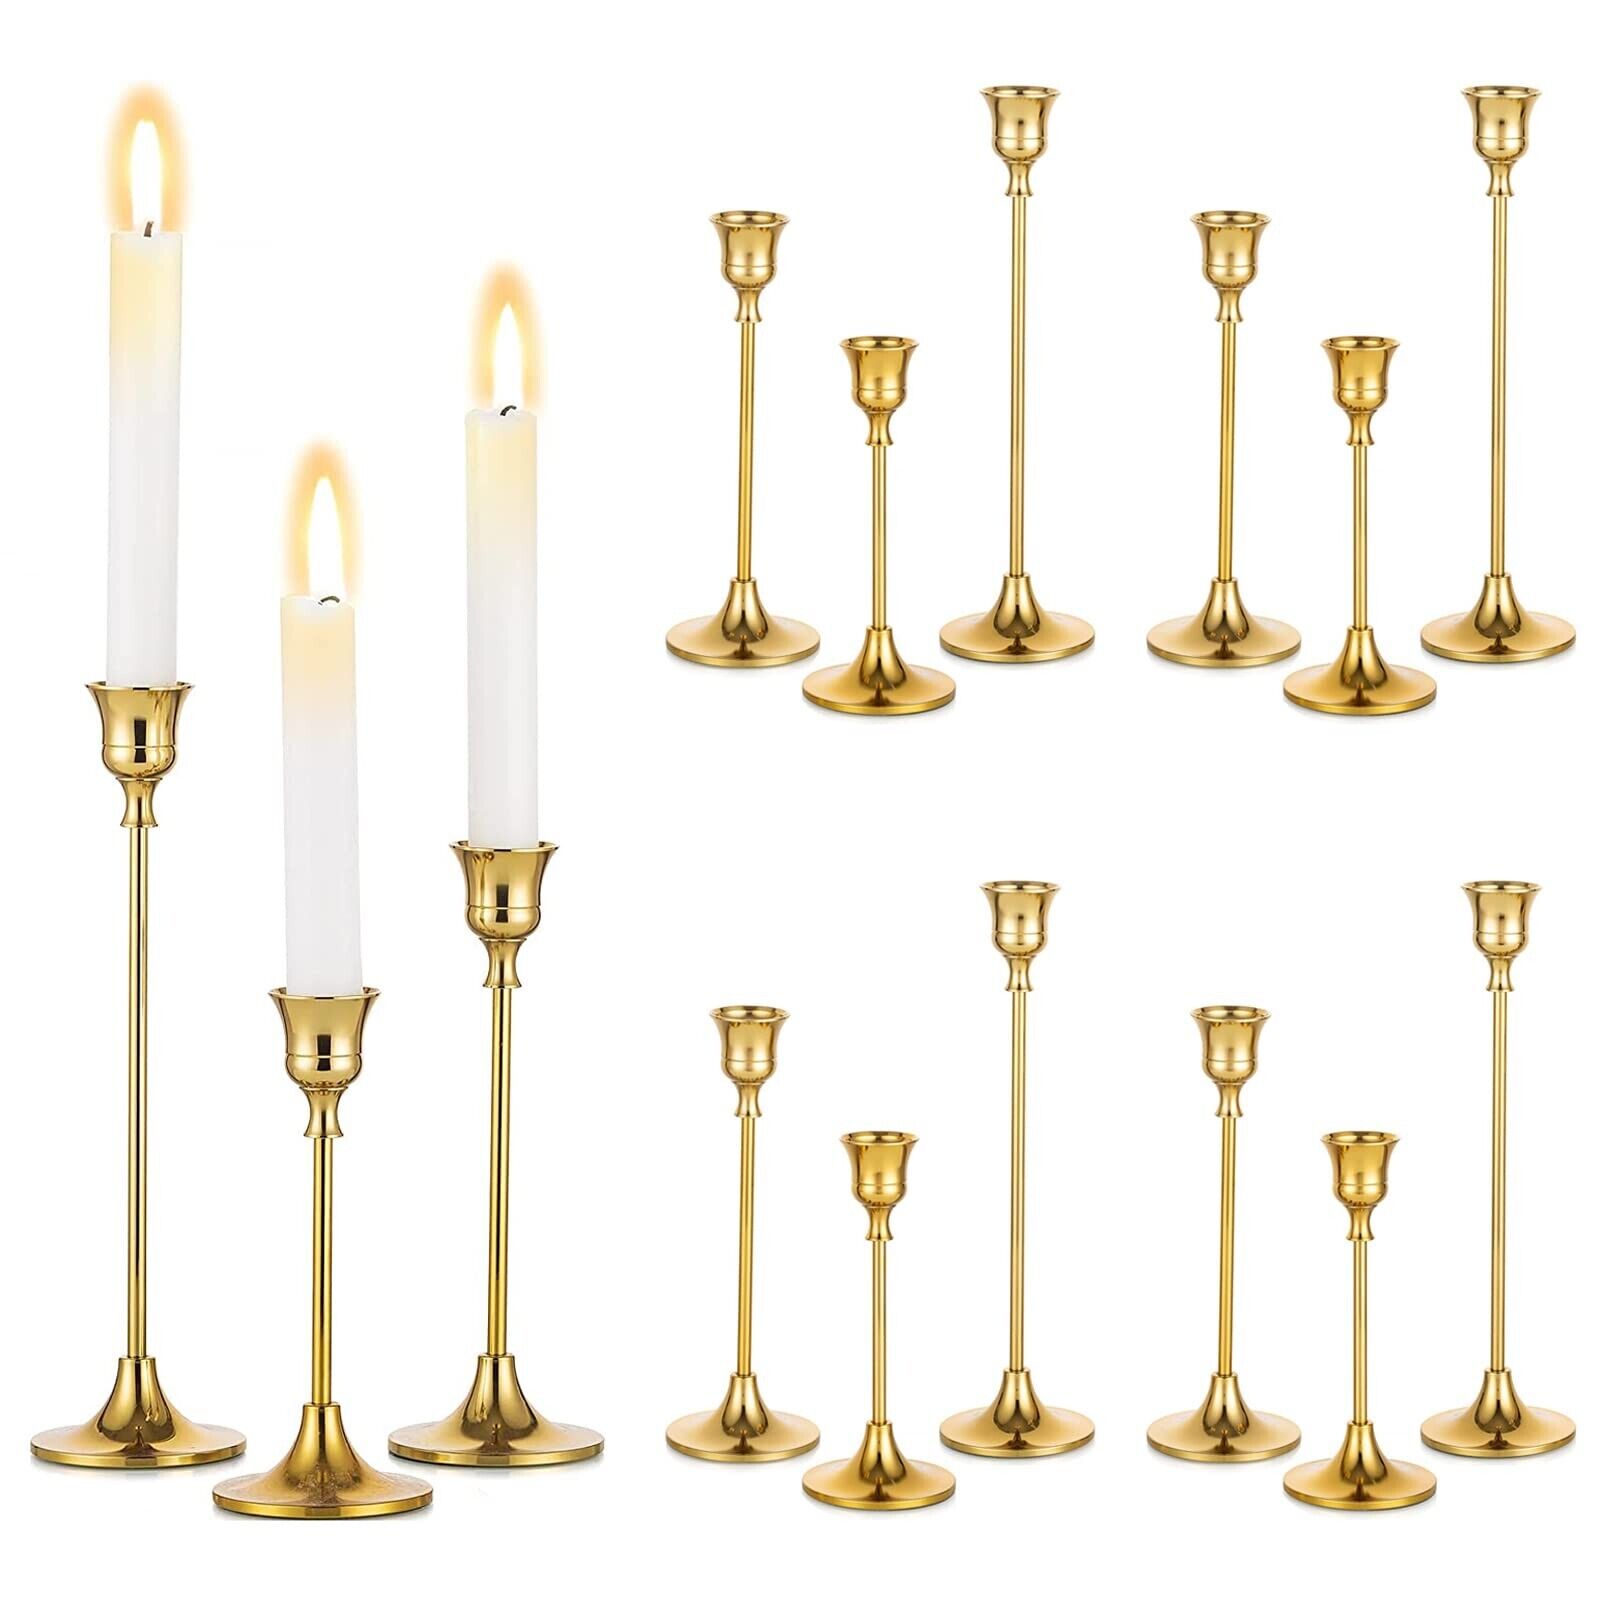 Sziqiqi Set of 15 Gold Candle Holders for Candlesticks Tall Taper Candle Hold...